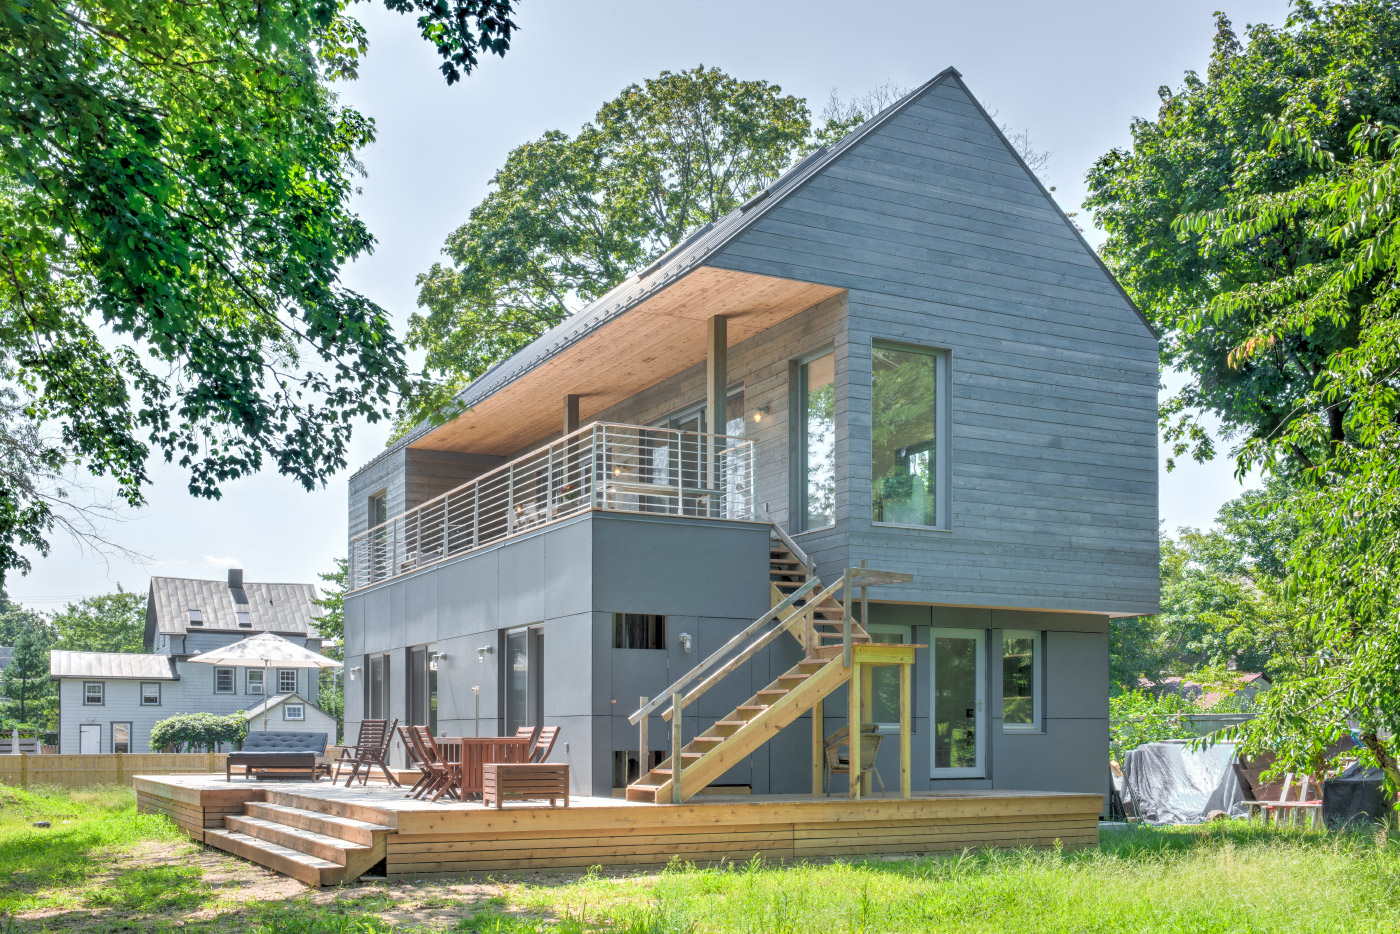 A two-story passive house clad in timber on North Fork